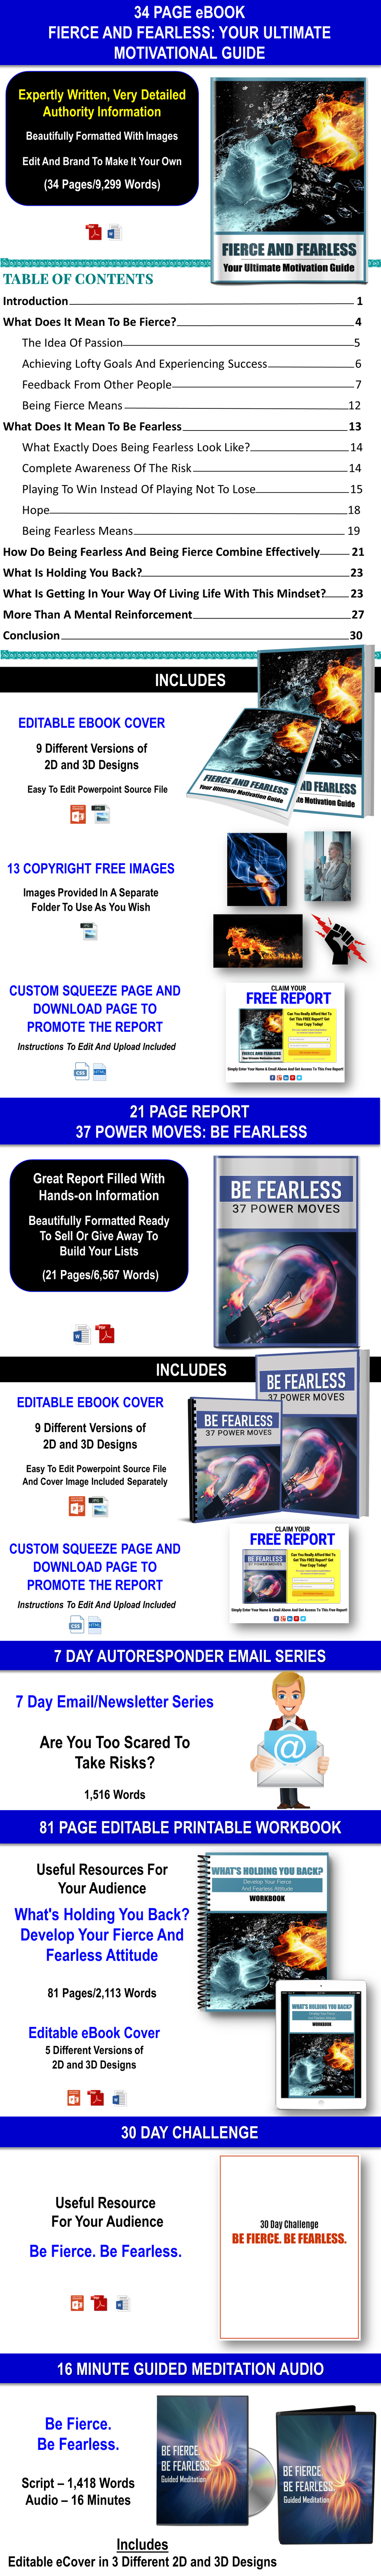 BE FIERCE. BE FEARLESS. MOTIVATIONAL Content with PLR Rights